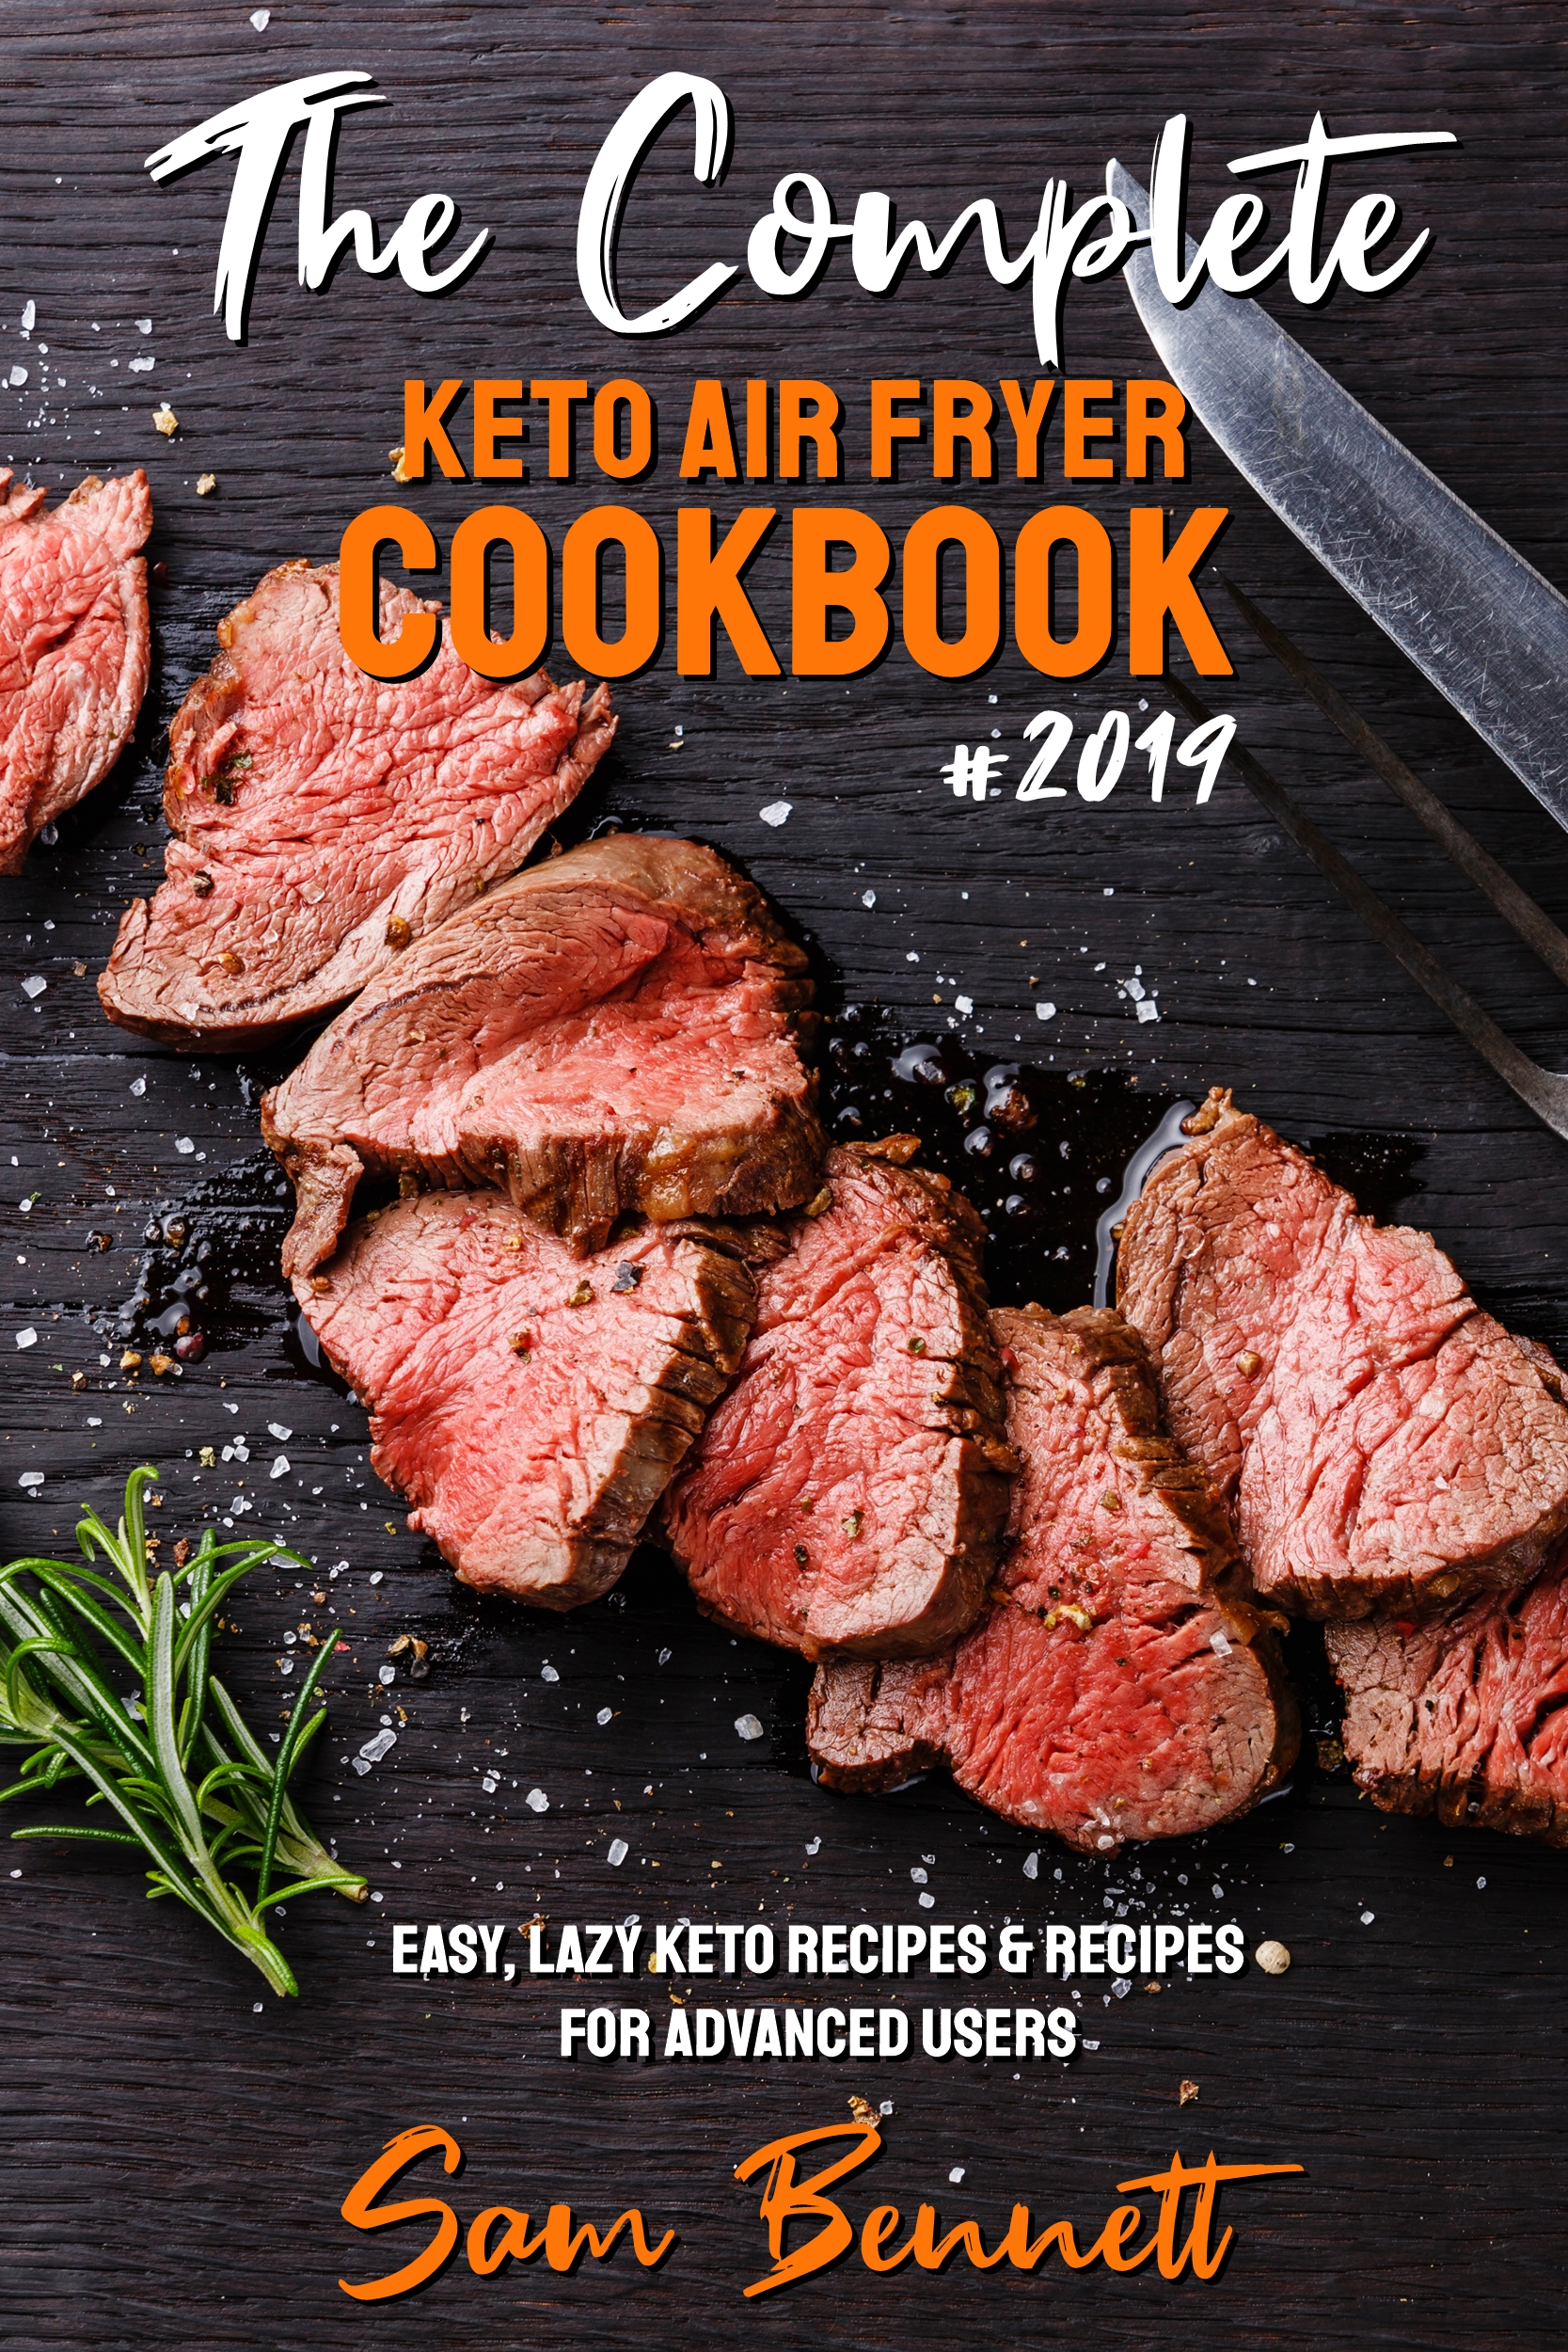 FREE: The Complete Keto Air Fryer Cookbook #2019: Easy, Lazy Keto Recipes & Recipes for Advanced Users by Sam Bennett